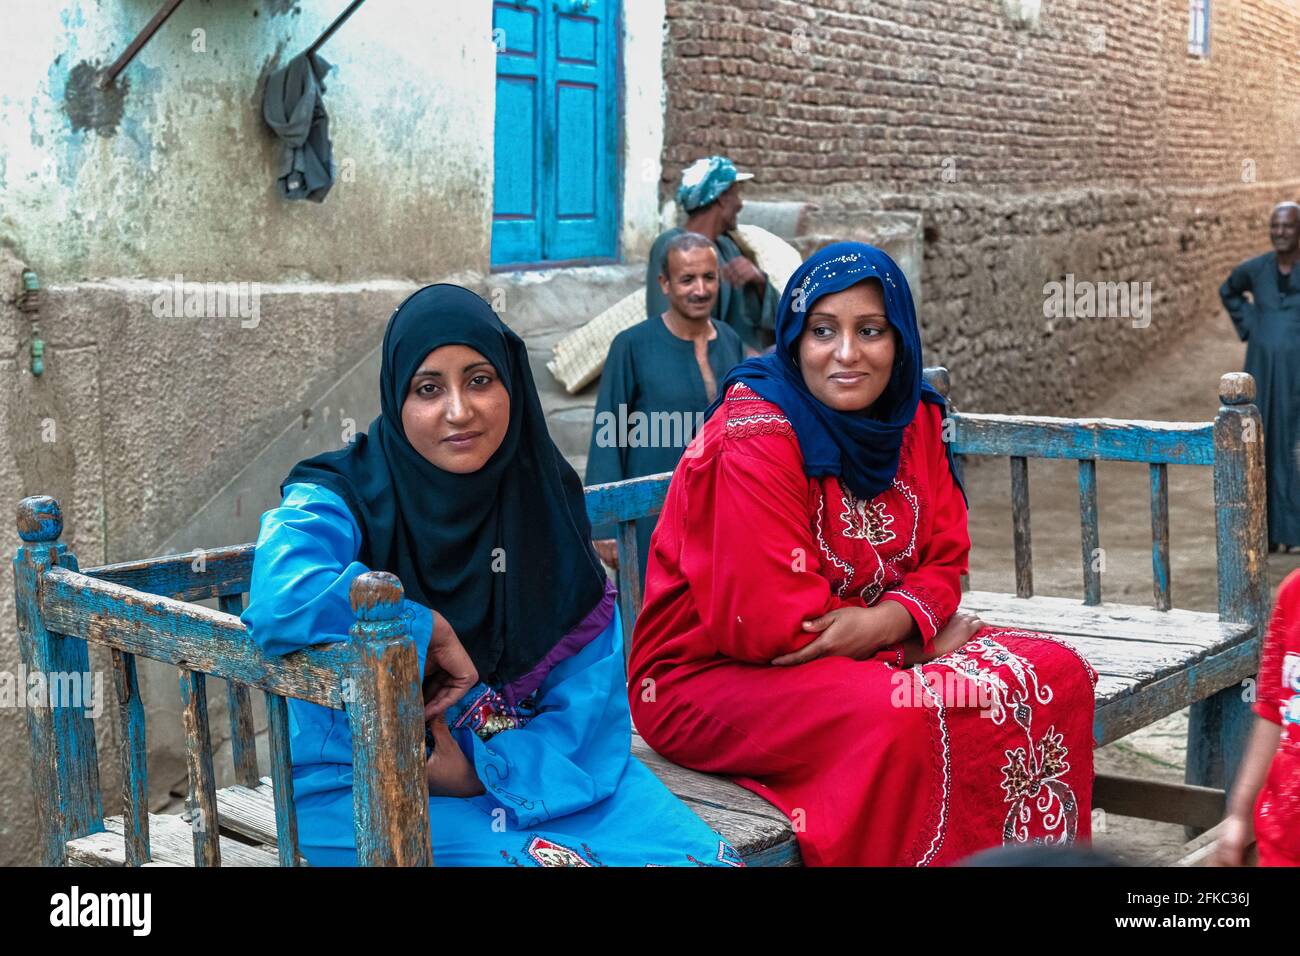 Two Egyptian women with headscarves, seated on a bench in a rural village on an island in the Nile River Stock Photo